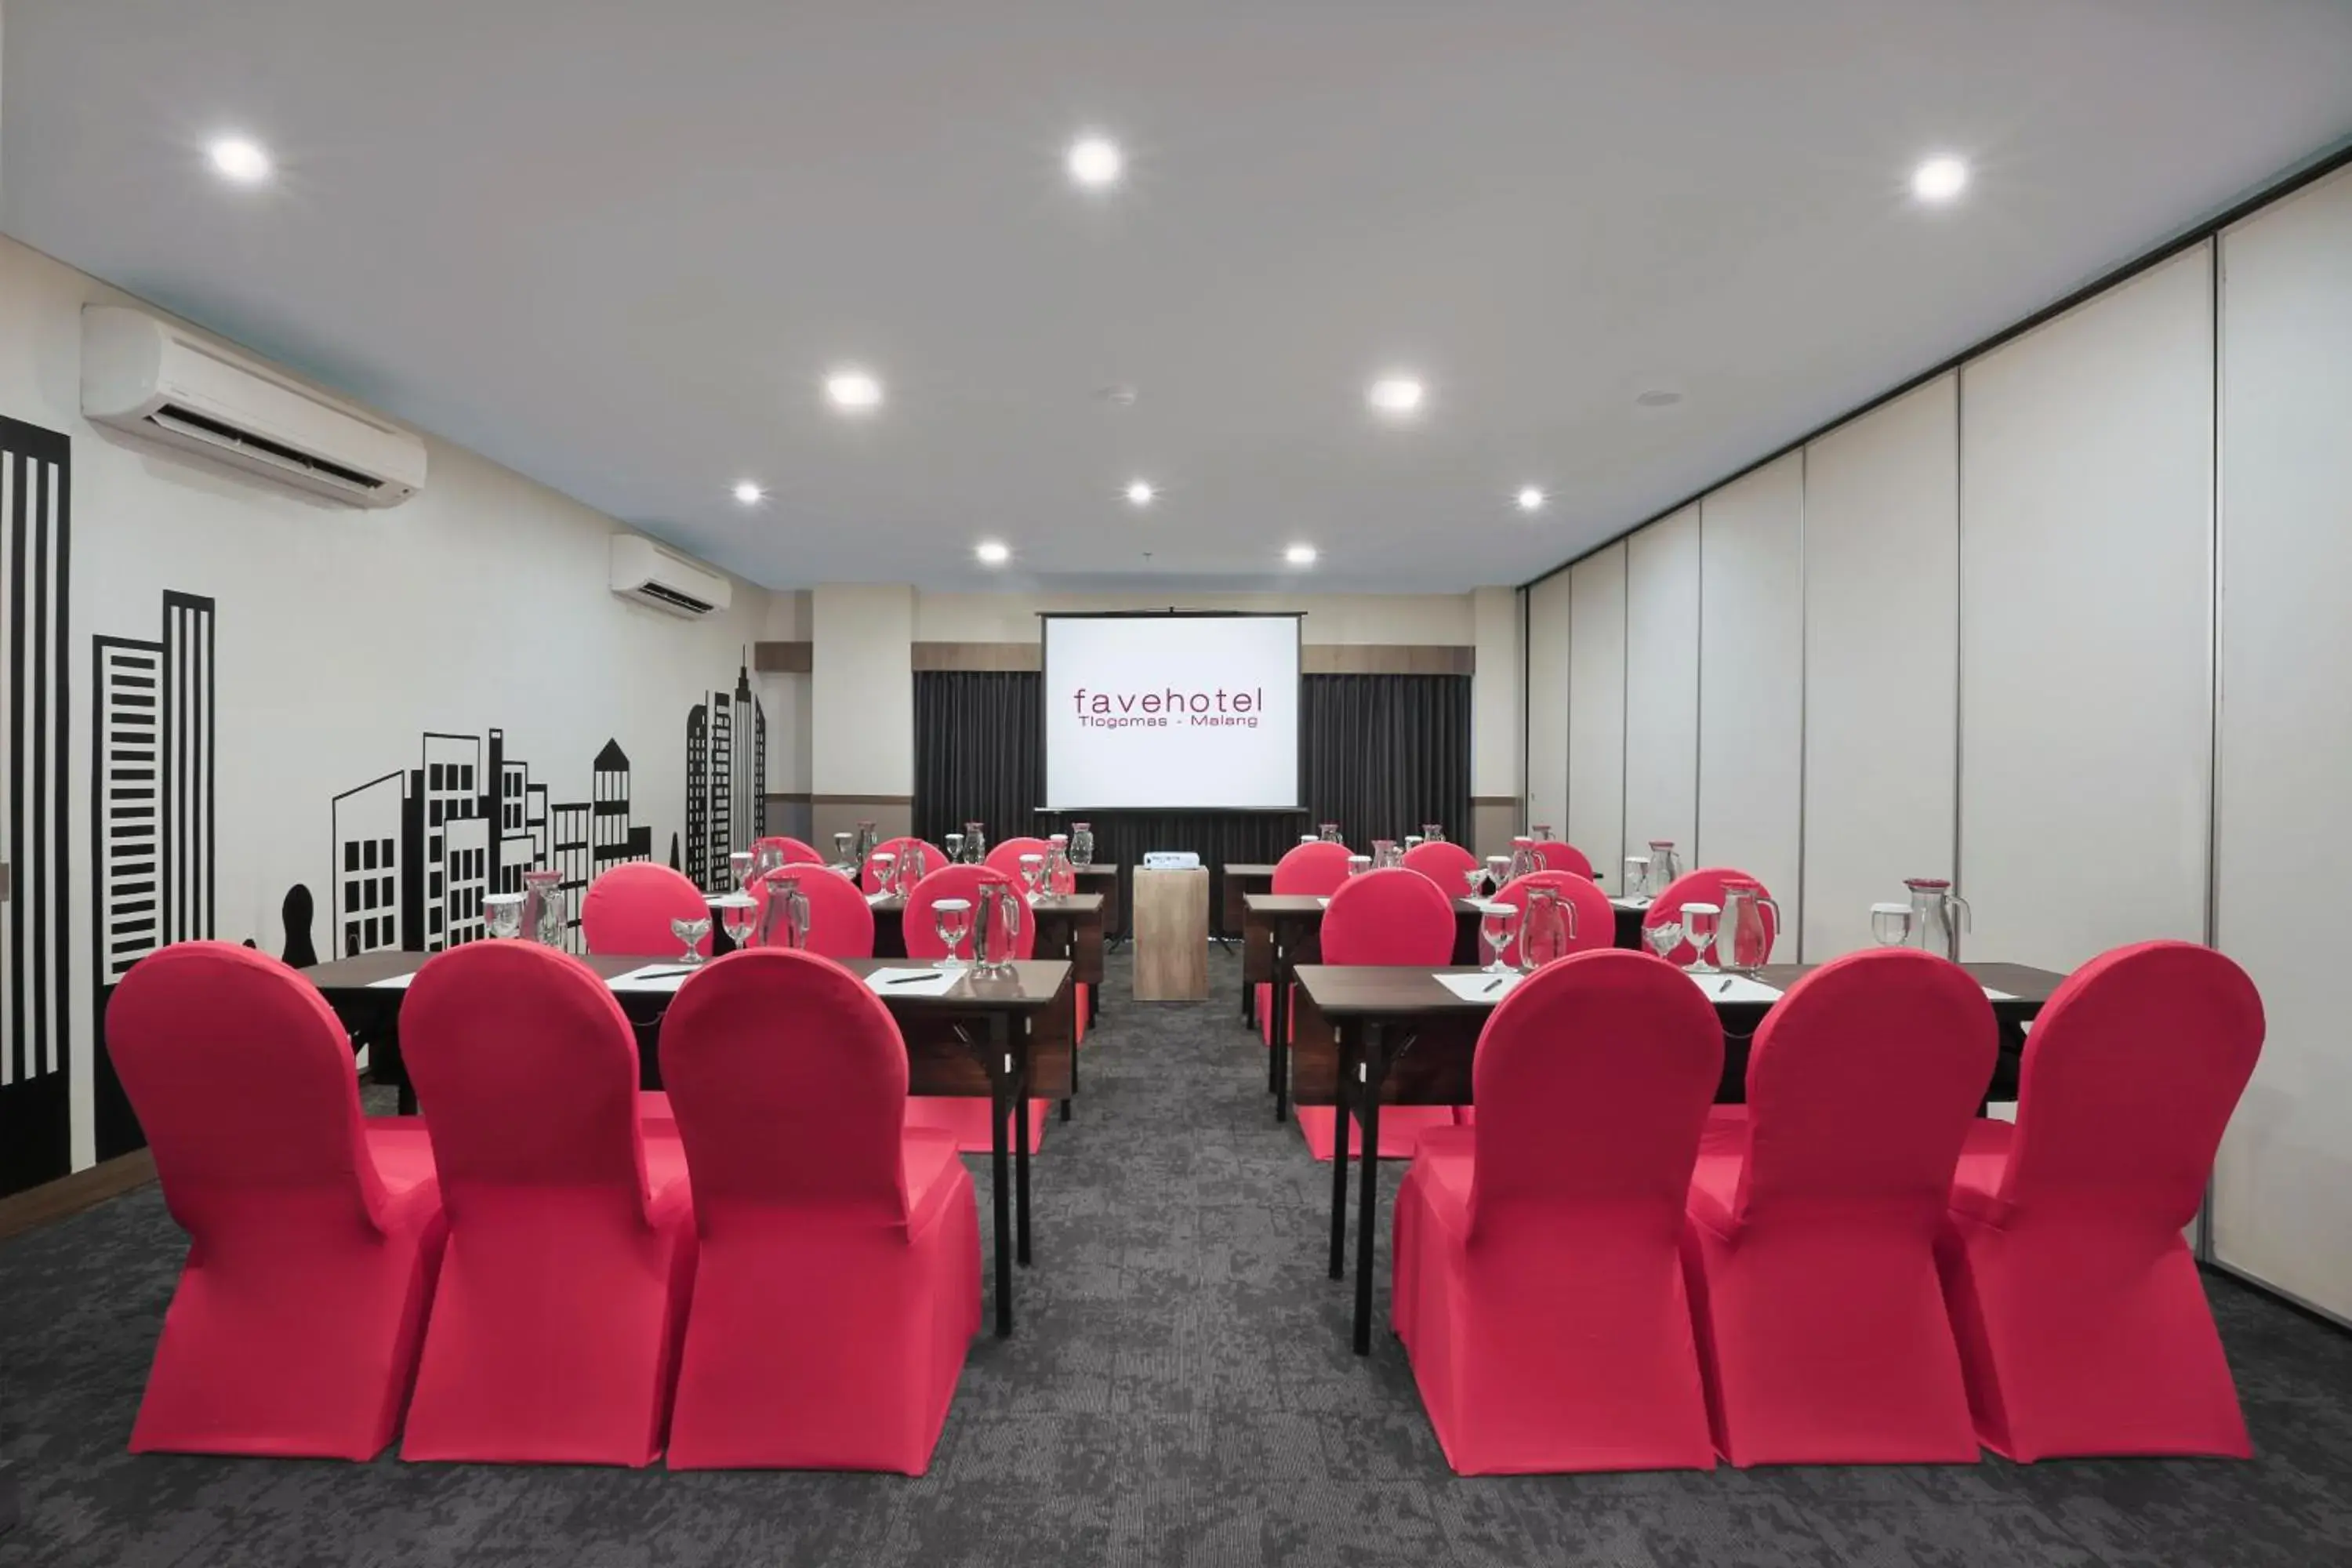 Meeting/conference room in favehotel Tlogomas Malang